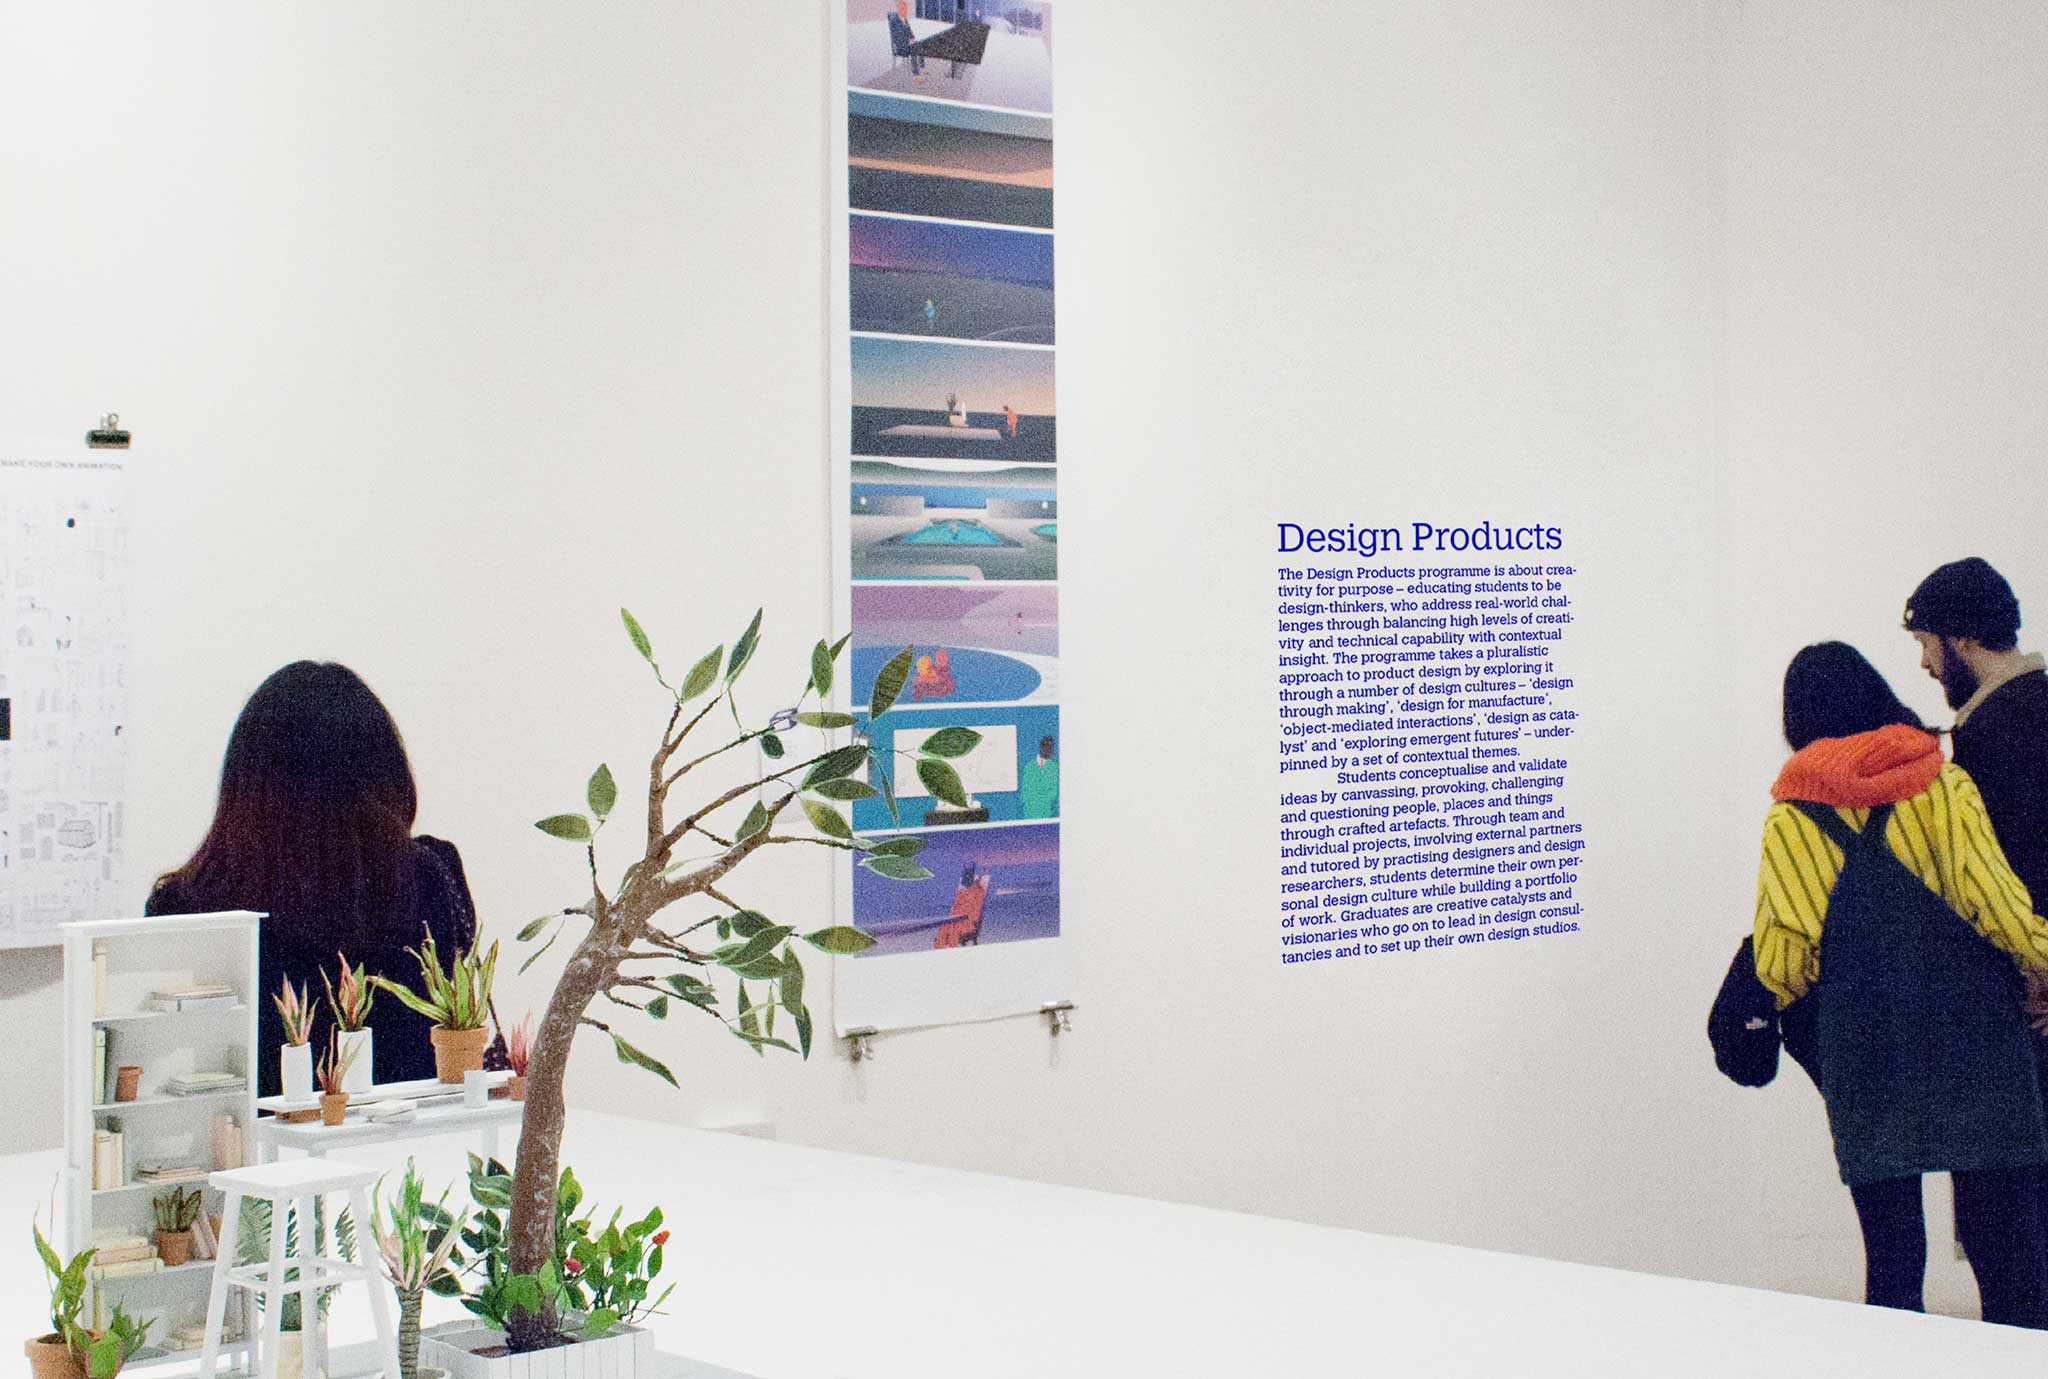 Royal College of Art show 2016 design products